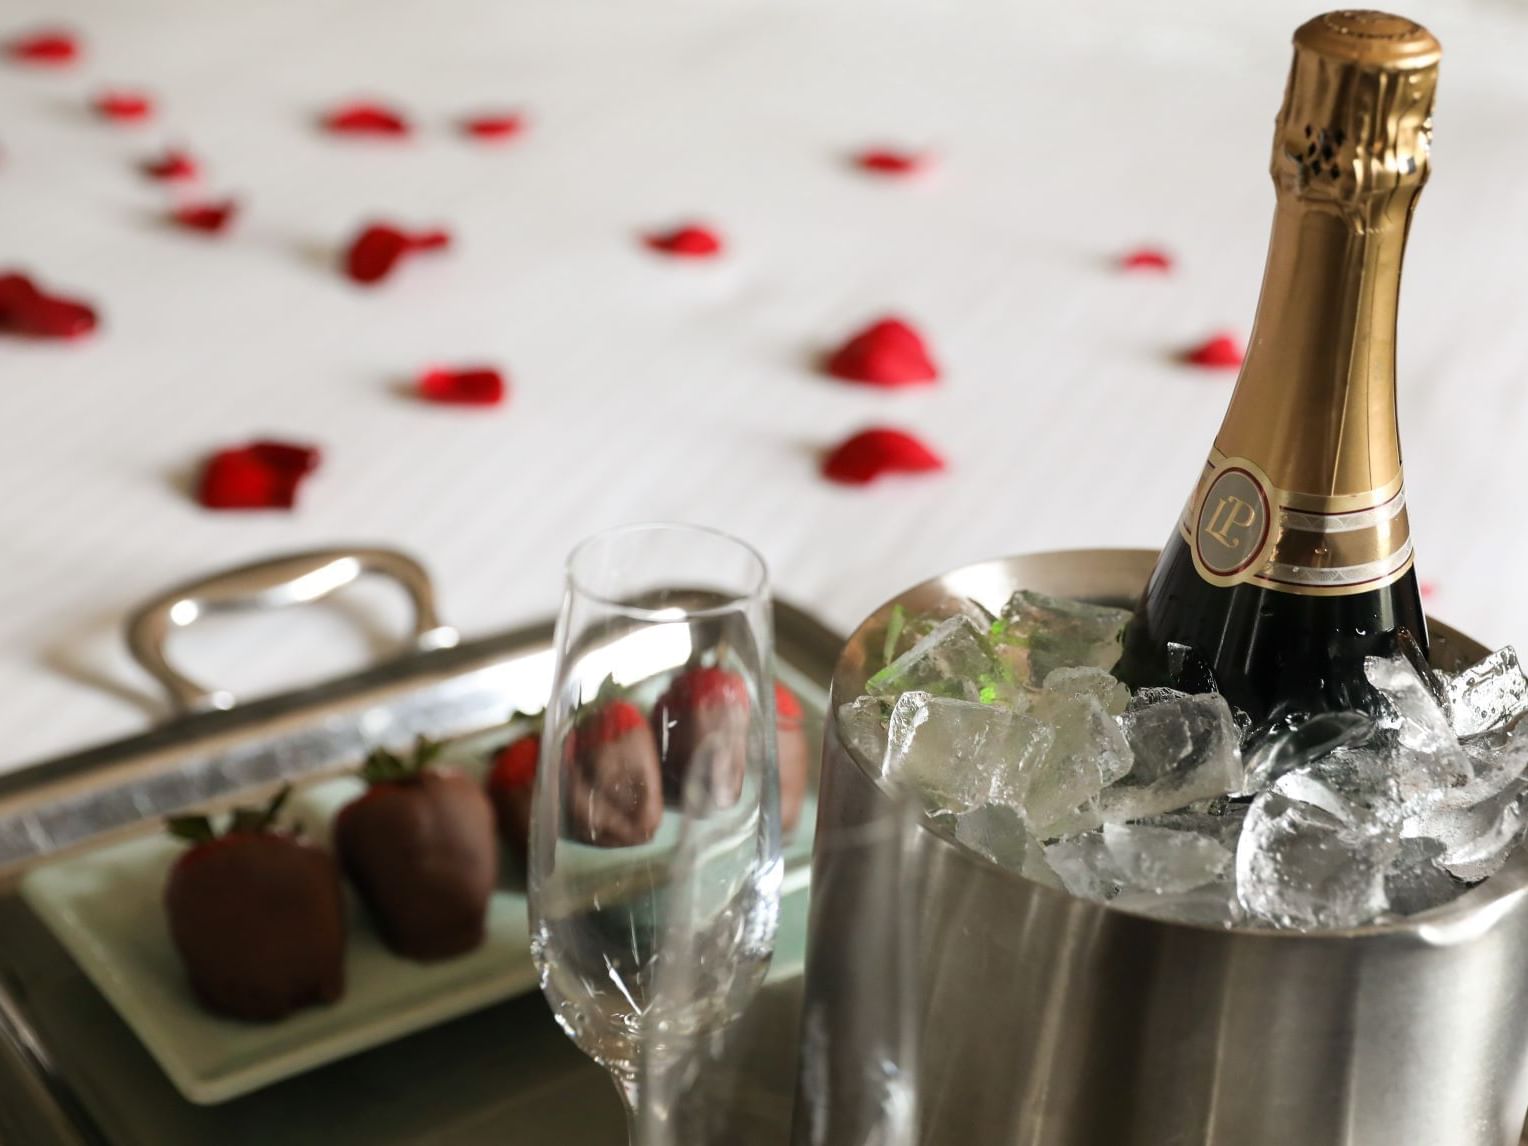 A bucket of champagne and chocolates on a white bed scattered with red rose petals